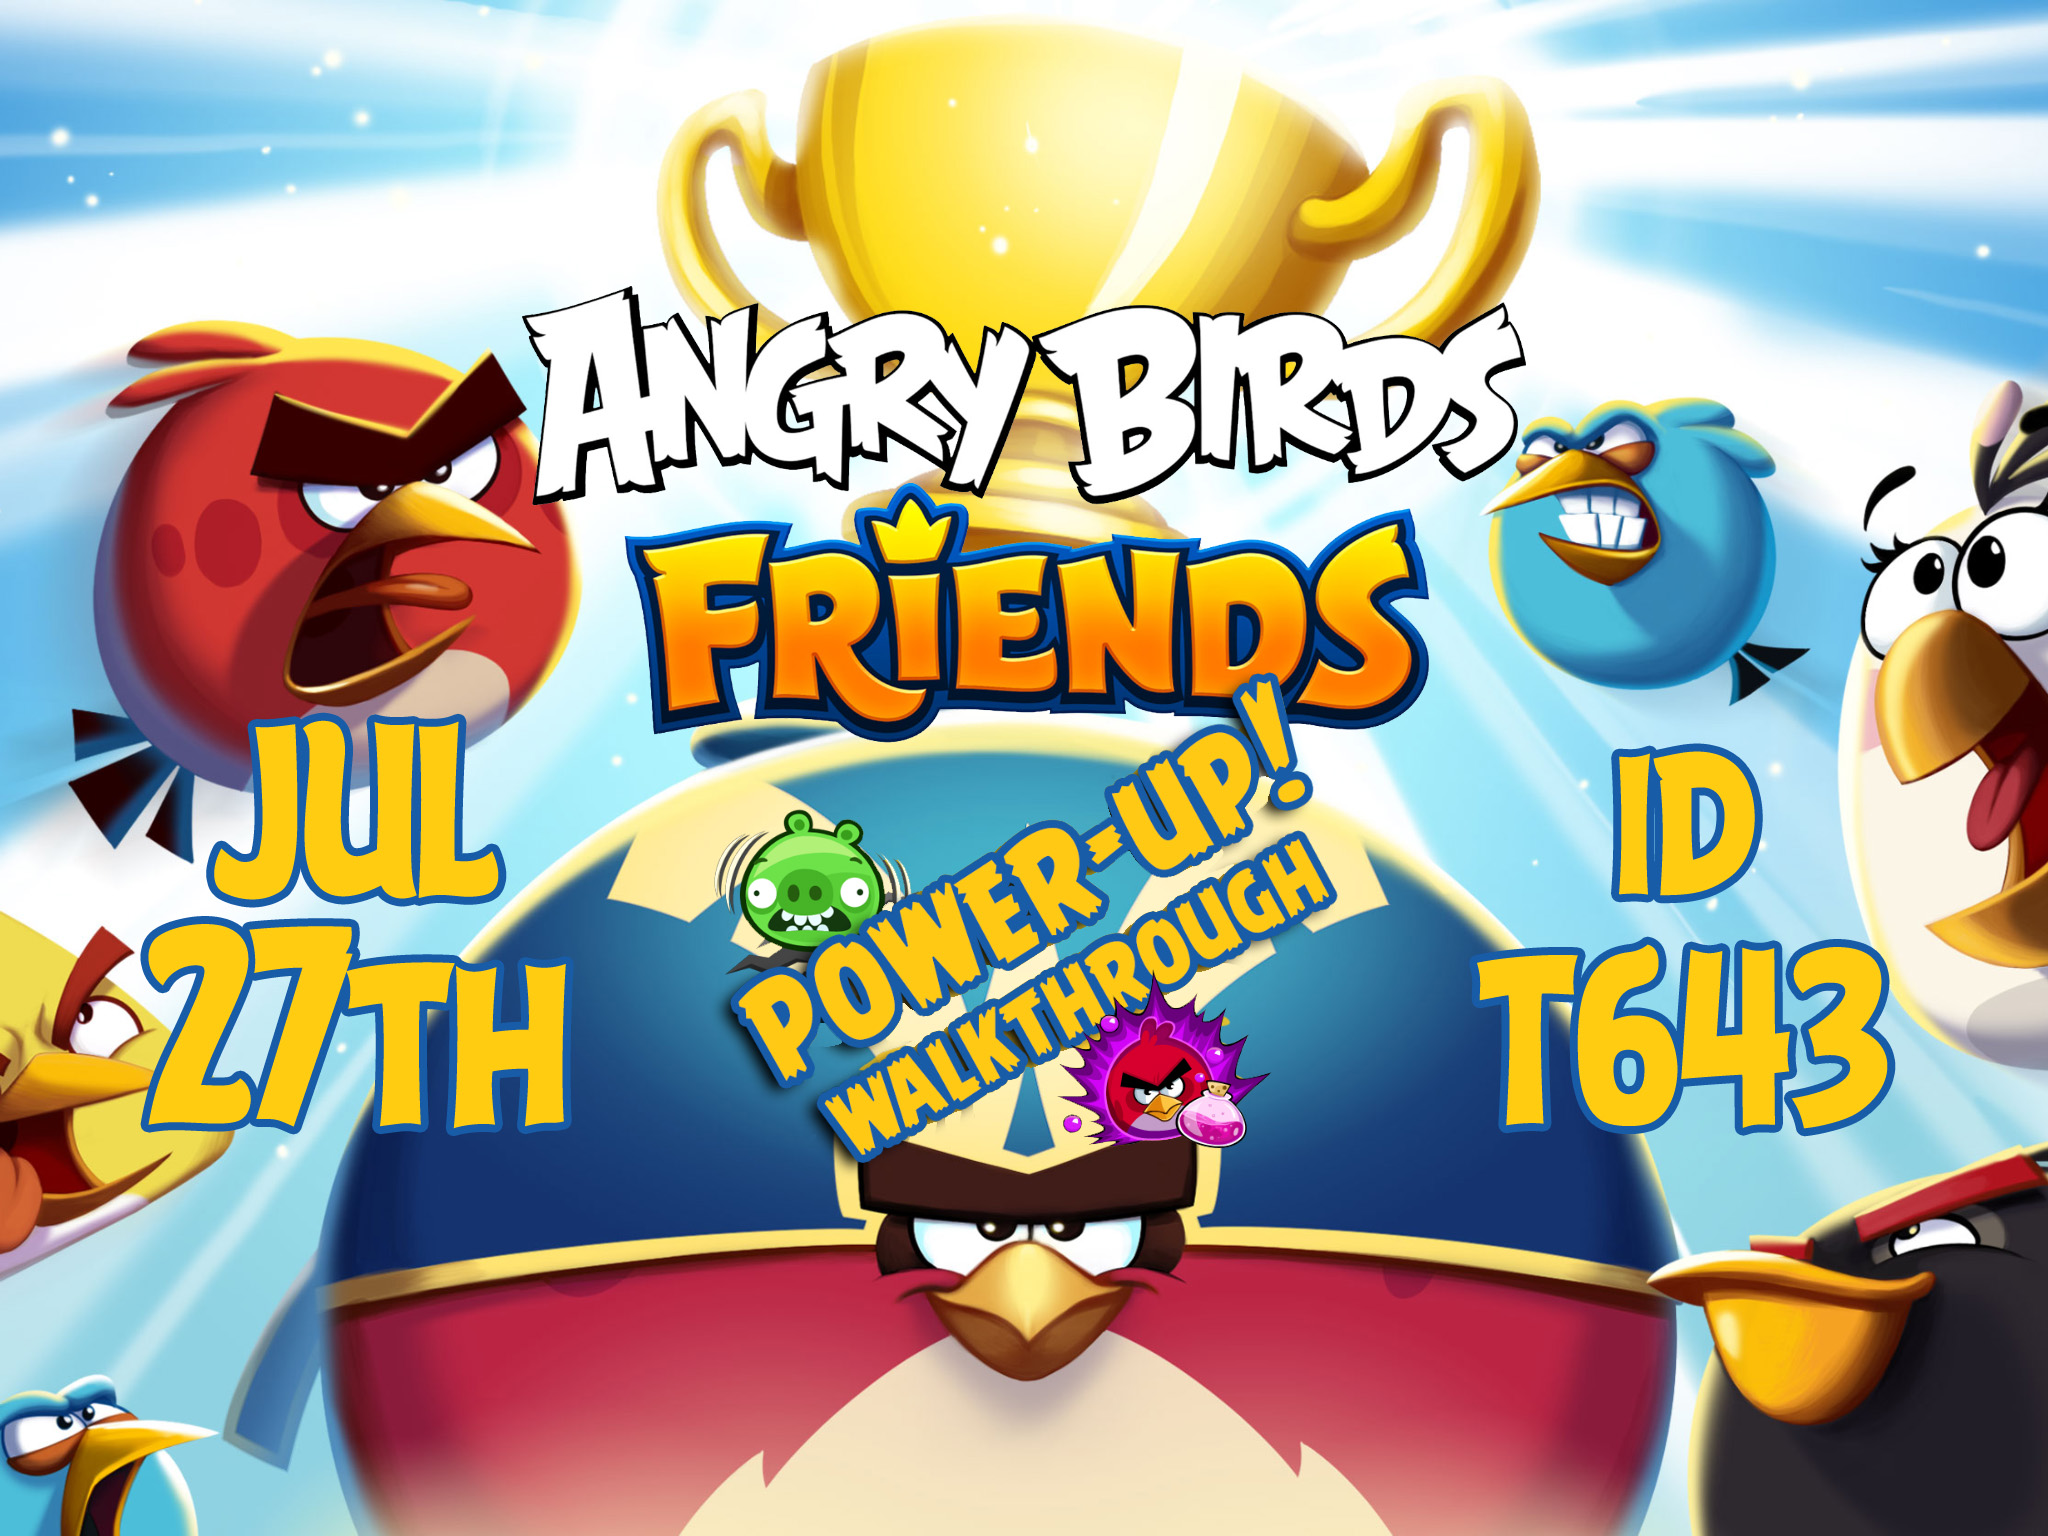 Angry-Birds-Friends-Tournament-T643-Feature-Image-PU